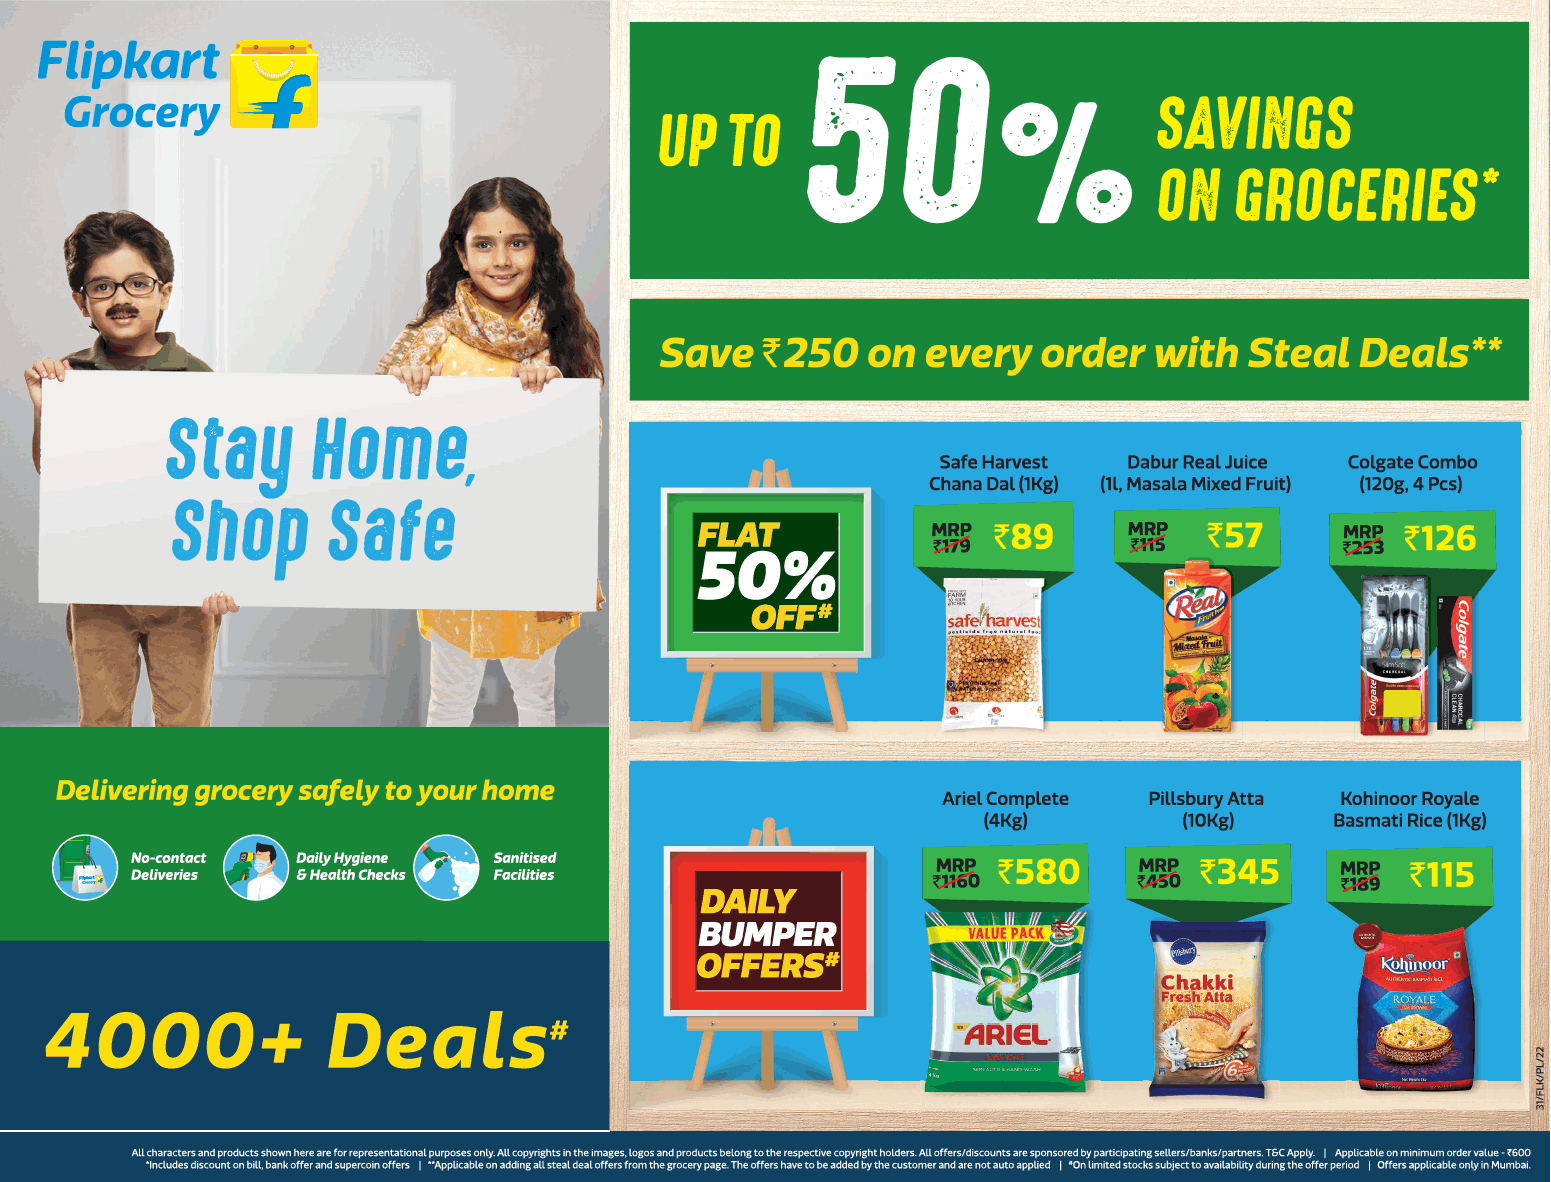 flipkart-grocery-stay-home-shop-safe-up-to-50%-savings-on-groceries-ad-times-of-india-mumbai-06-06-2021